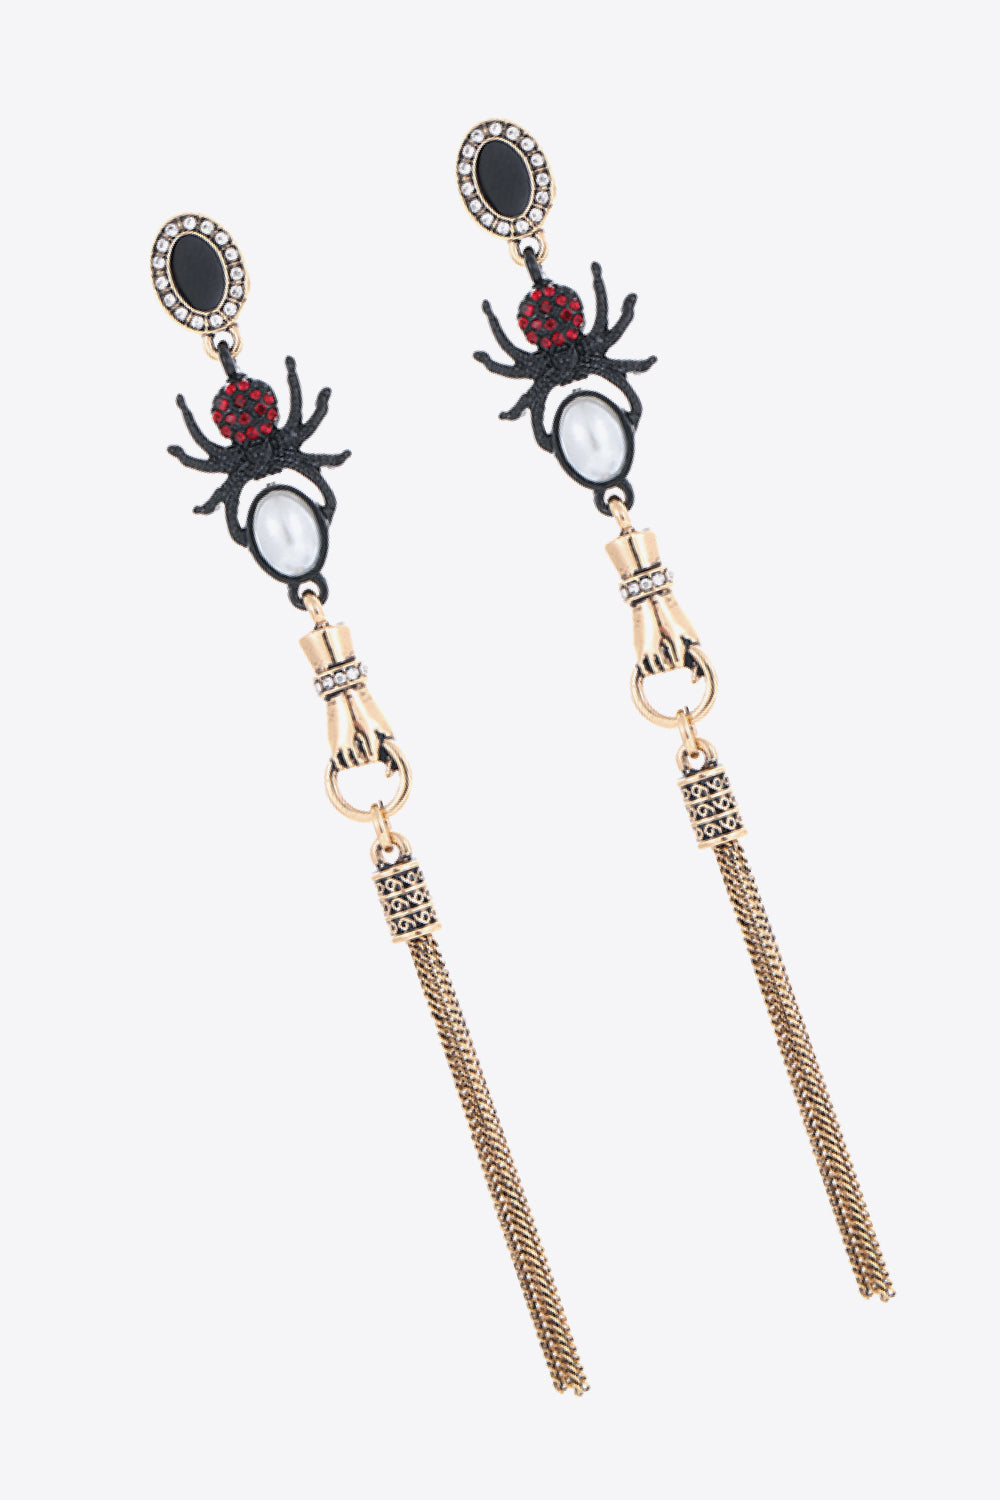 18K Gold-Plated Spider Drop Earrings - Alonna's Legging Land